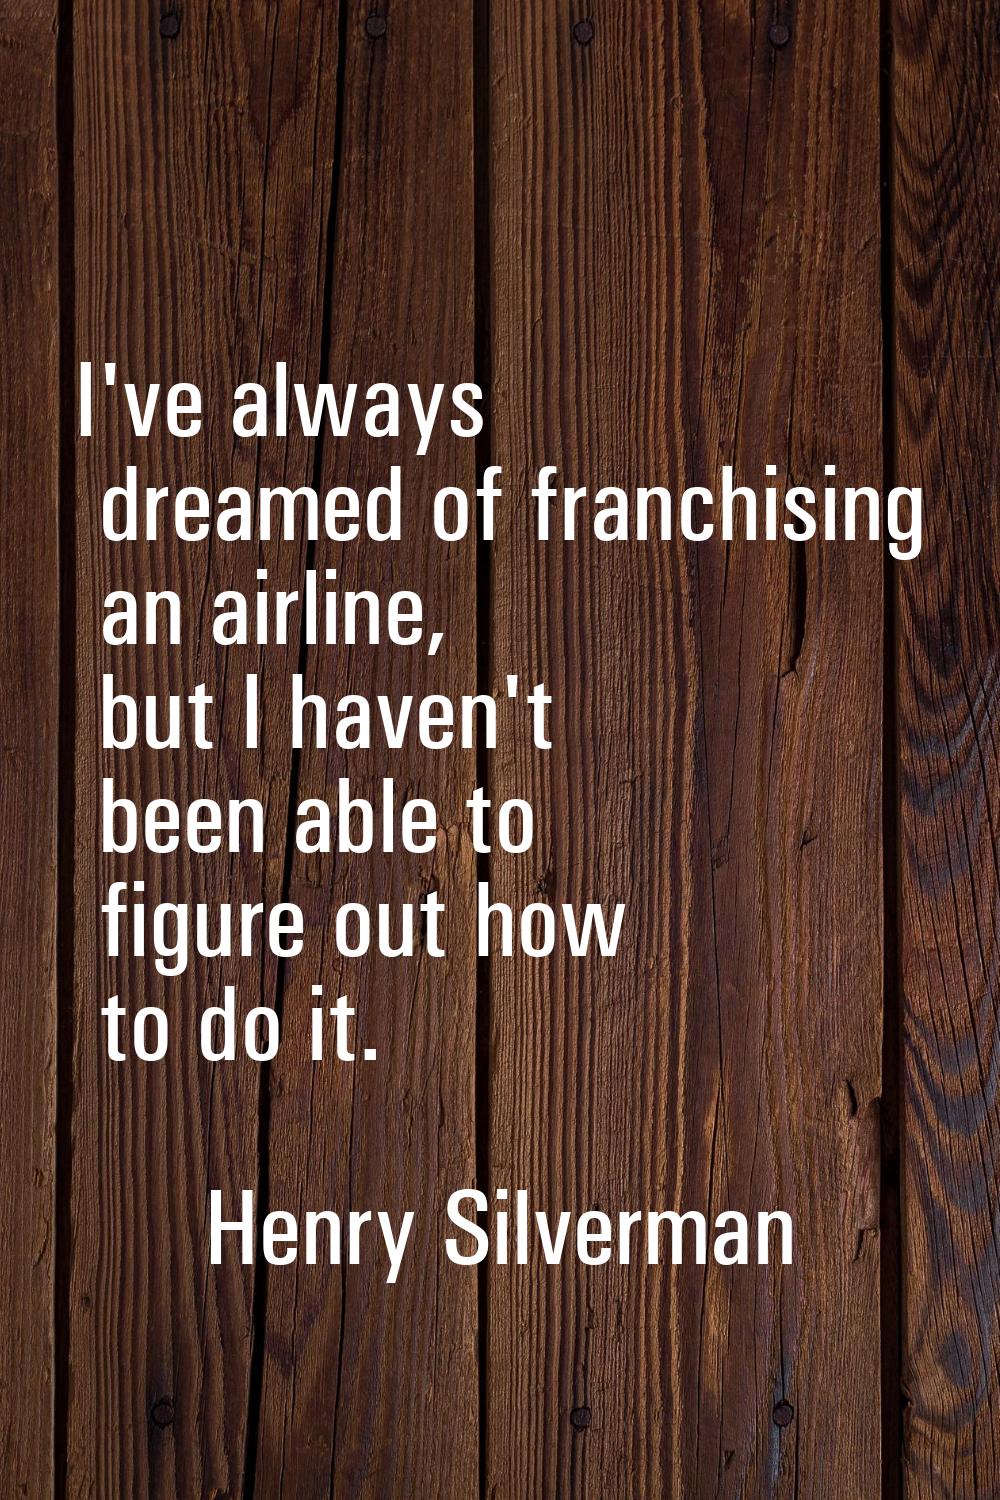 I've always dreamed of franchising an airline, but I haven't been able to figure out how to do it.